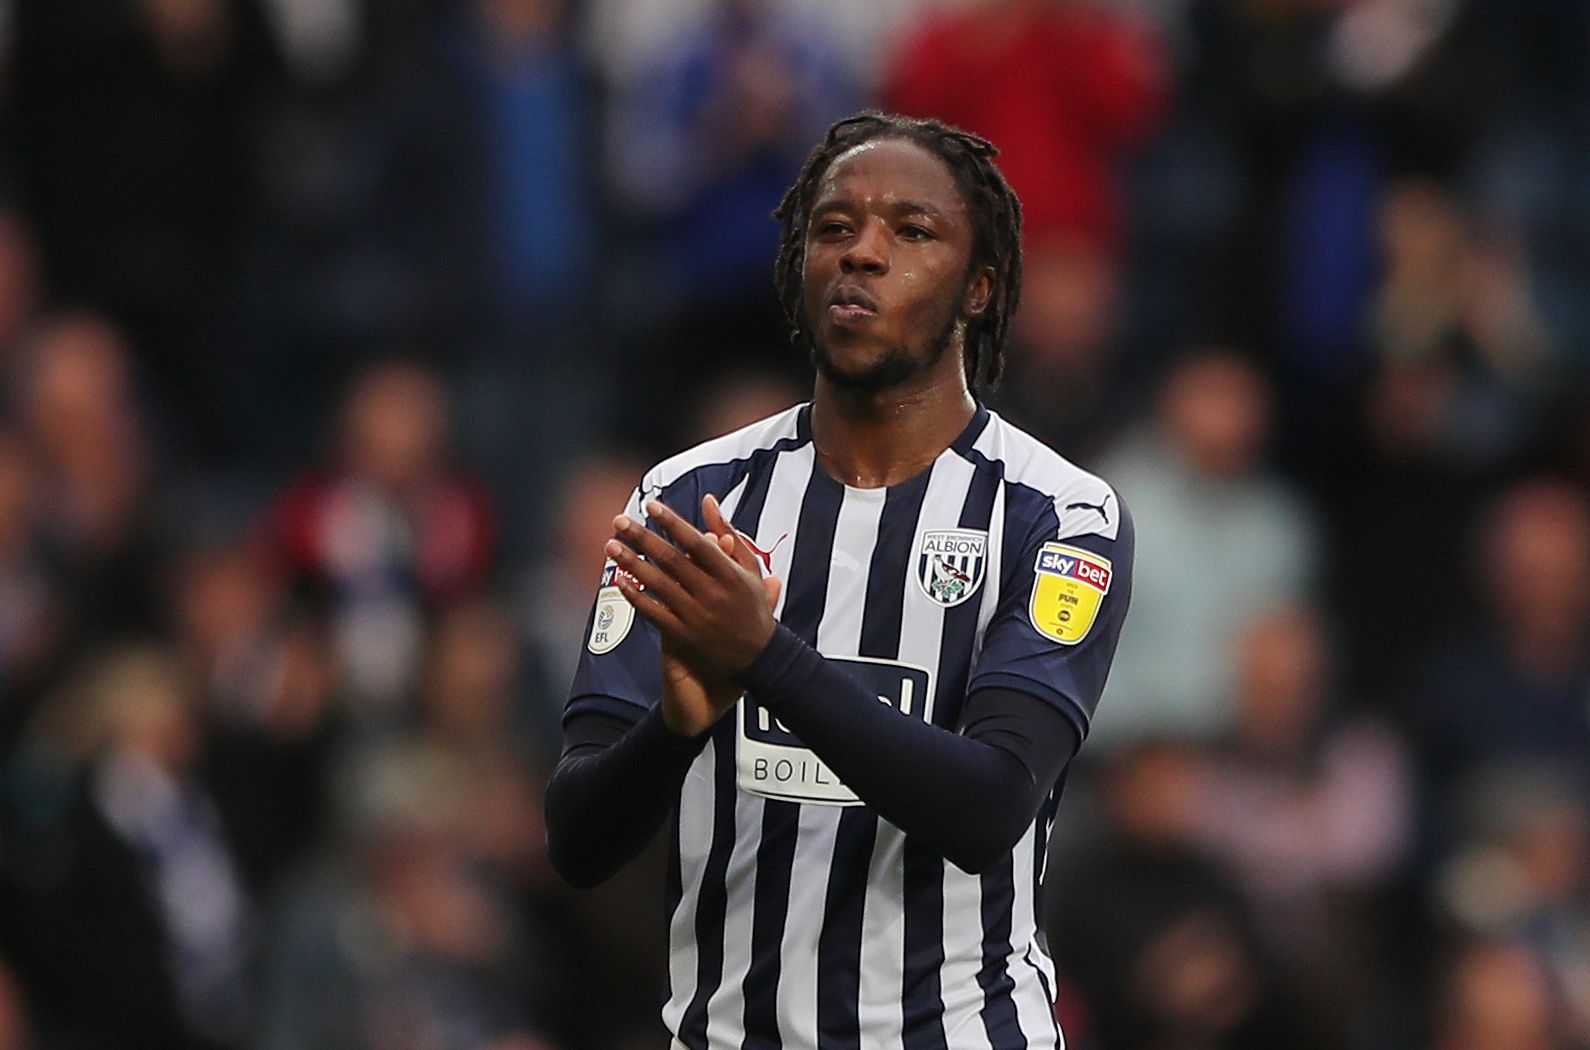 Soccer Football - Championship - West Bromwich Albion v Cardiff City - The Hawthorns, West Bromwich, Britain - October 5, 2019   West Bromwich Albion's Romaine Sawyers applauds fans after the match    Action Images/Molly Darlington    EDITORIAL USE ONLY. No use with unauthorized audio, video, data, fixture lists, club/league logos or "live" services. Online in-match use limited to 75 images, no video emulation. No use in betting, games or single club/league/player publications.  Please contact y